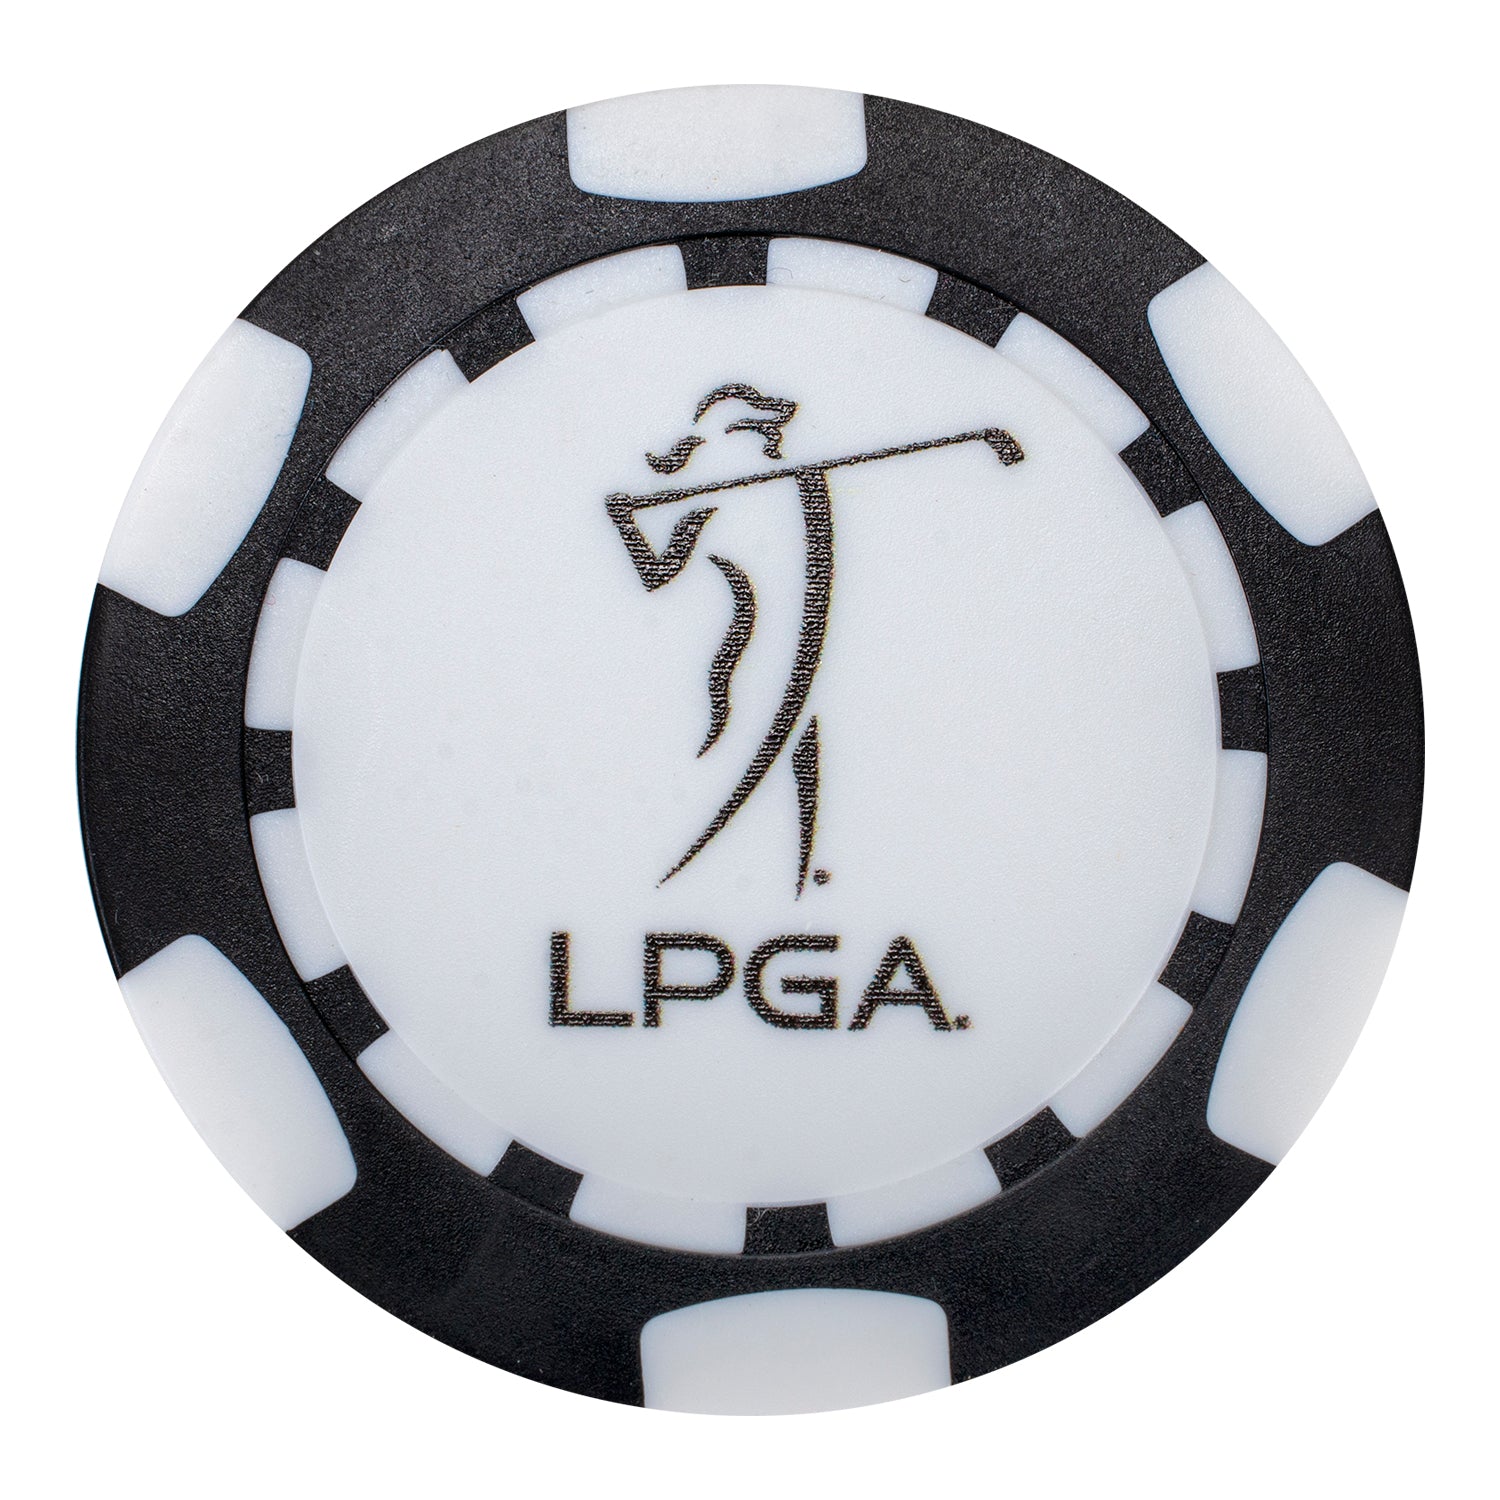 Ahead 2023 LPGA Poker Chip in Black - Front View